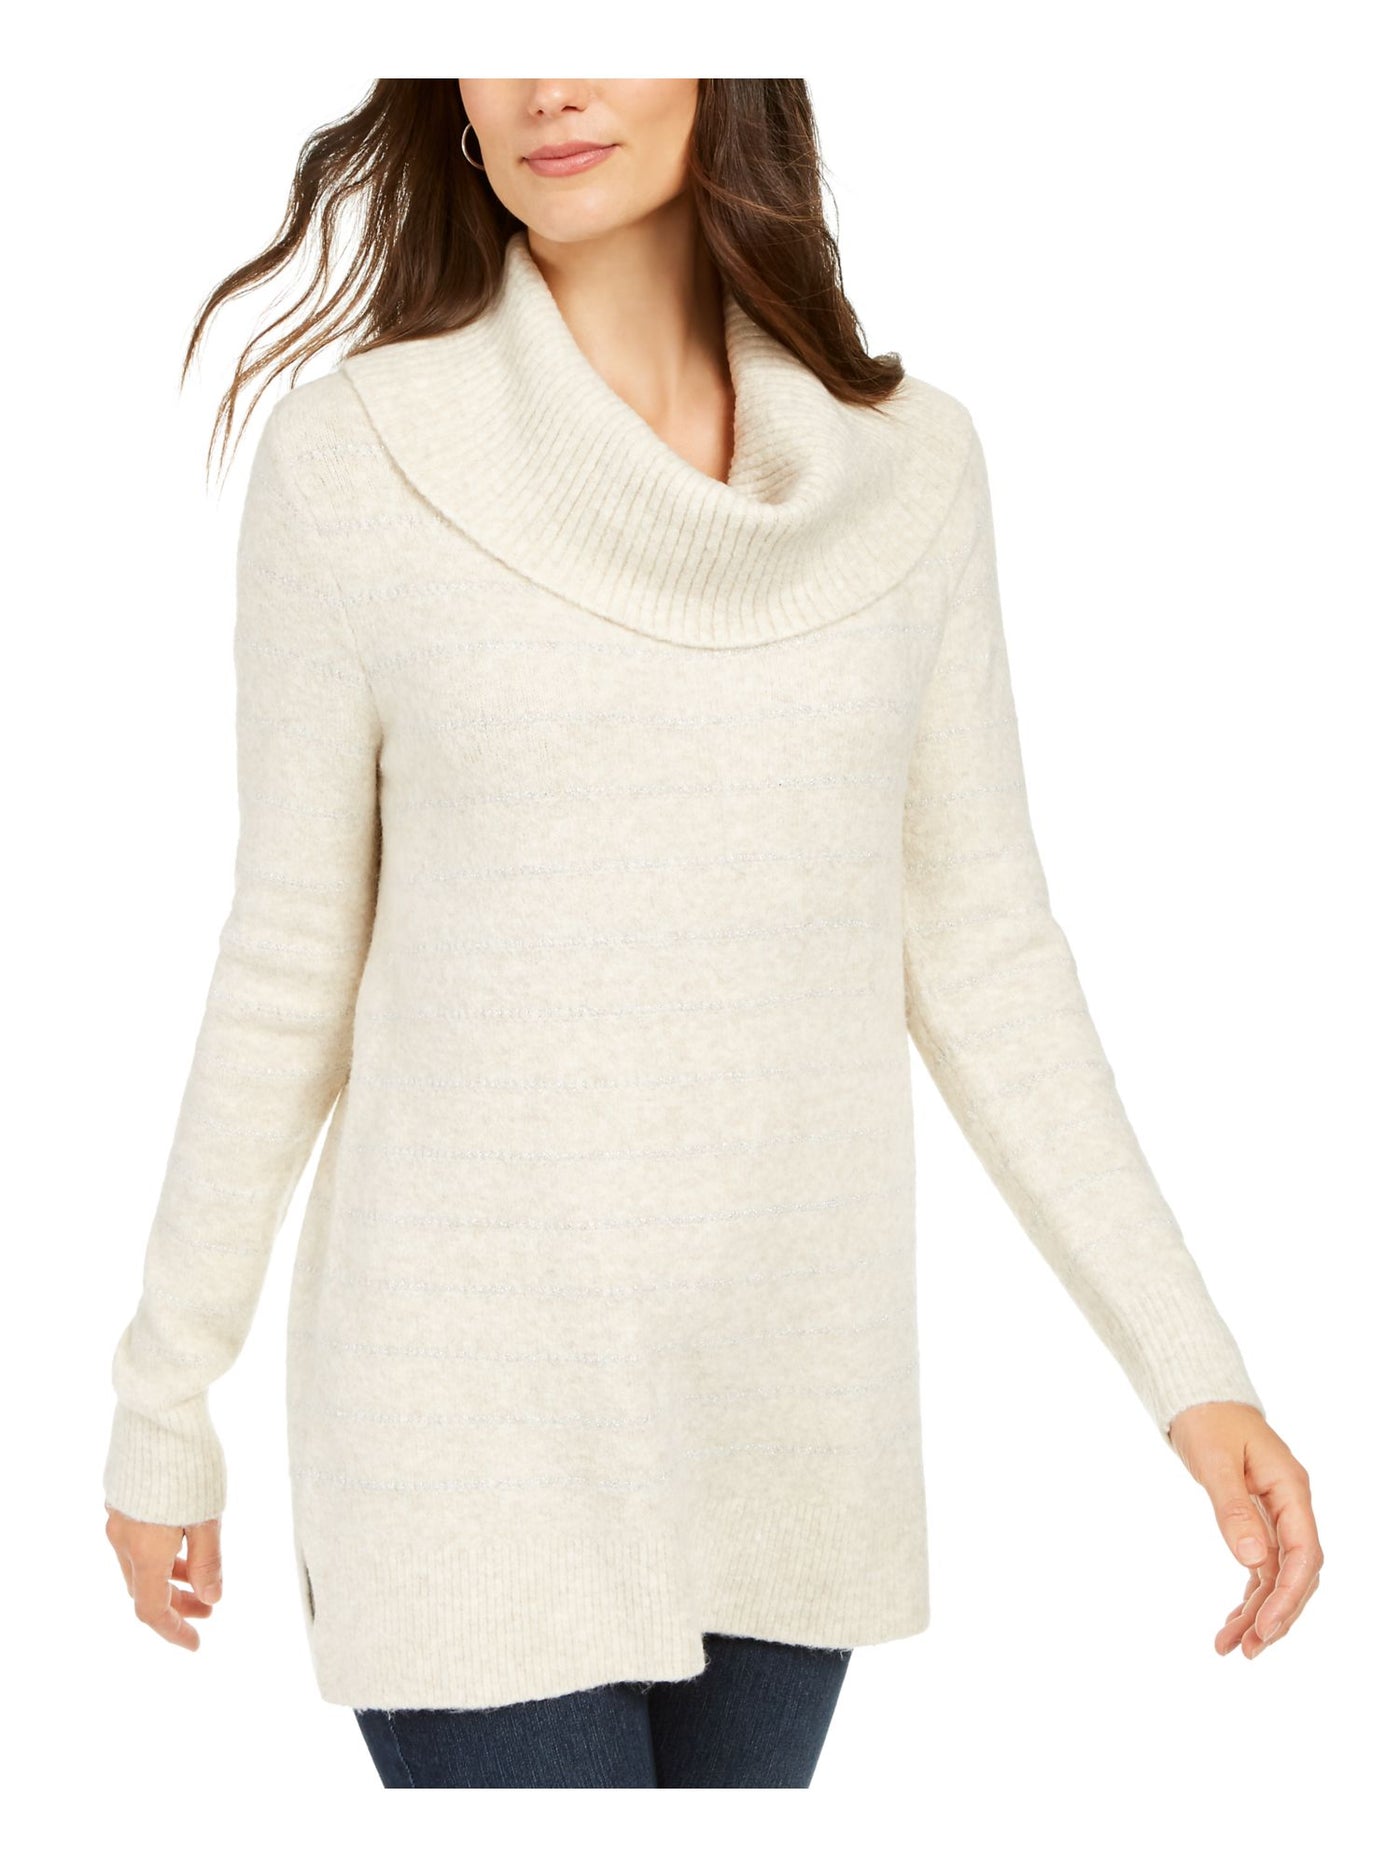 STYLE & COMPANY Womens Embellished Ribbed Long Sleeve Cowl Neck T-Shirt